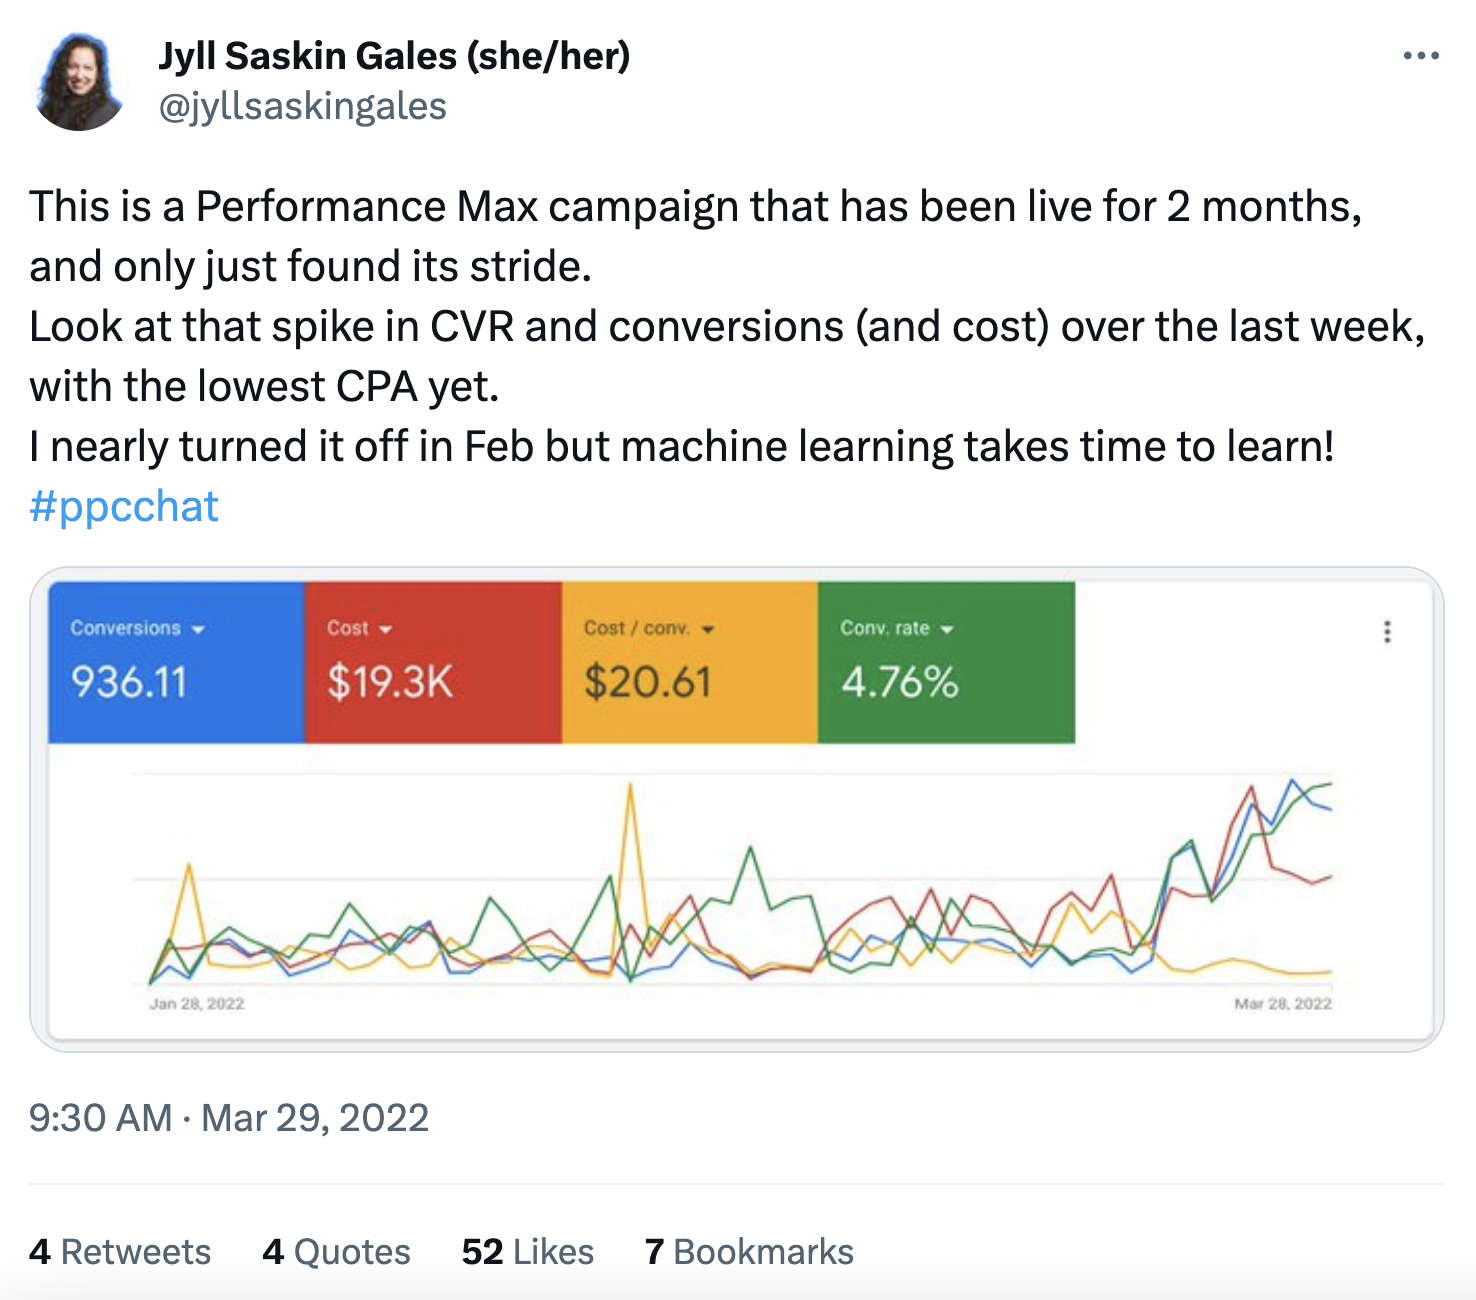 Tweet from @jyllsaskingales that says "This is a Performance Max campaign that has been live for 2 months, and only just found its stride. 
Look at that spike in CVR and conversions (and cost) over the last week, with the lowest CPA yet. 
I nearly turned it off in Feb but machine learning takes time to learn!"